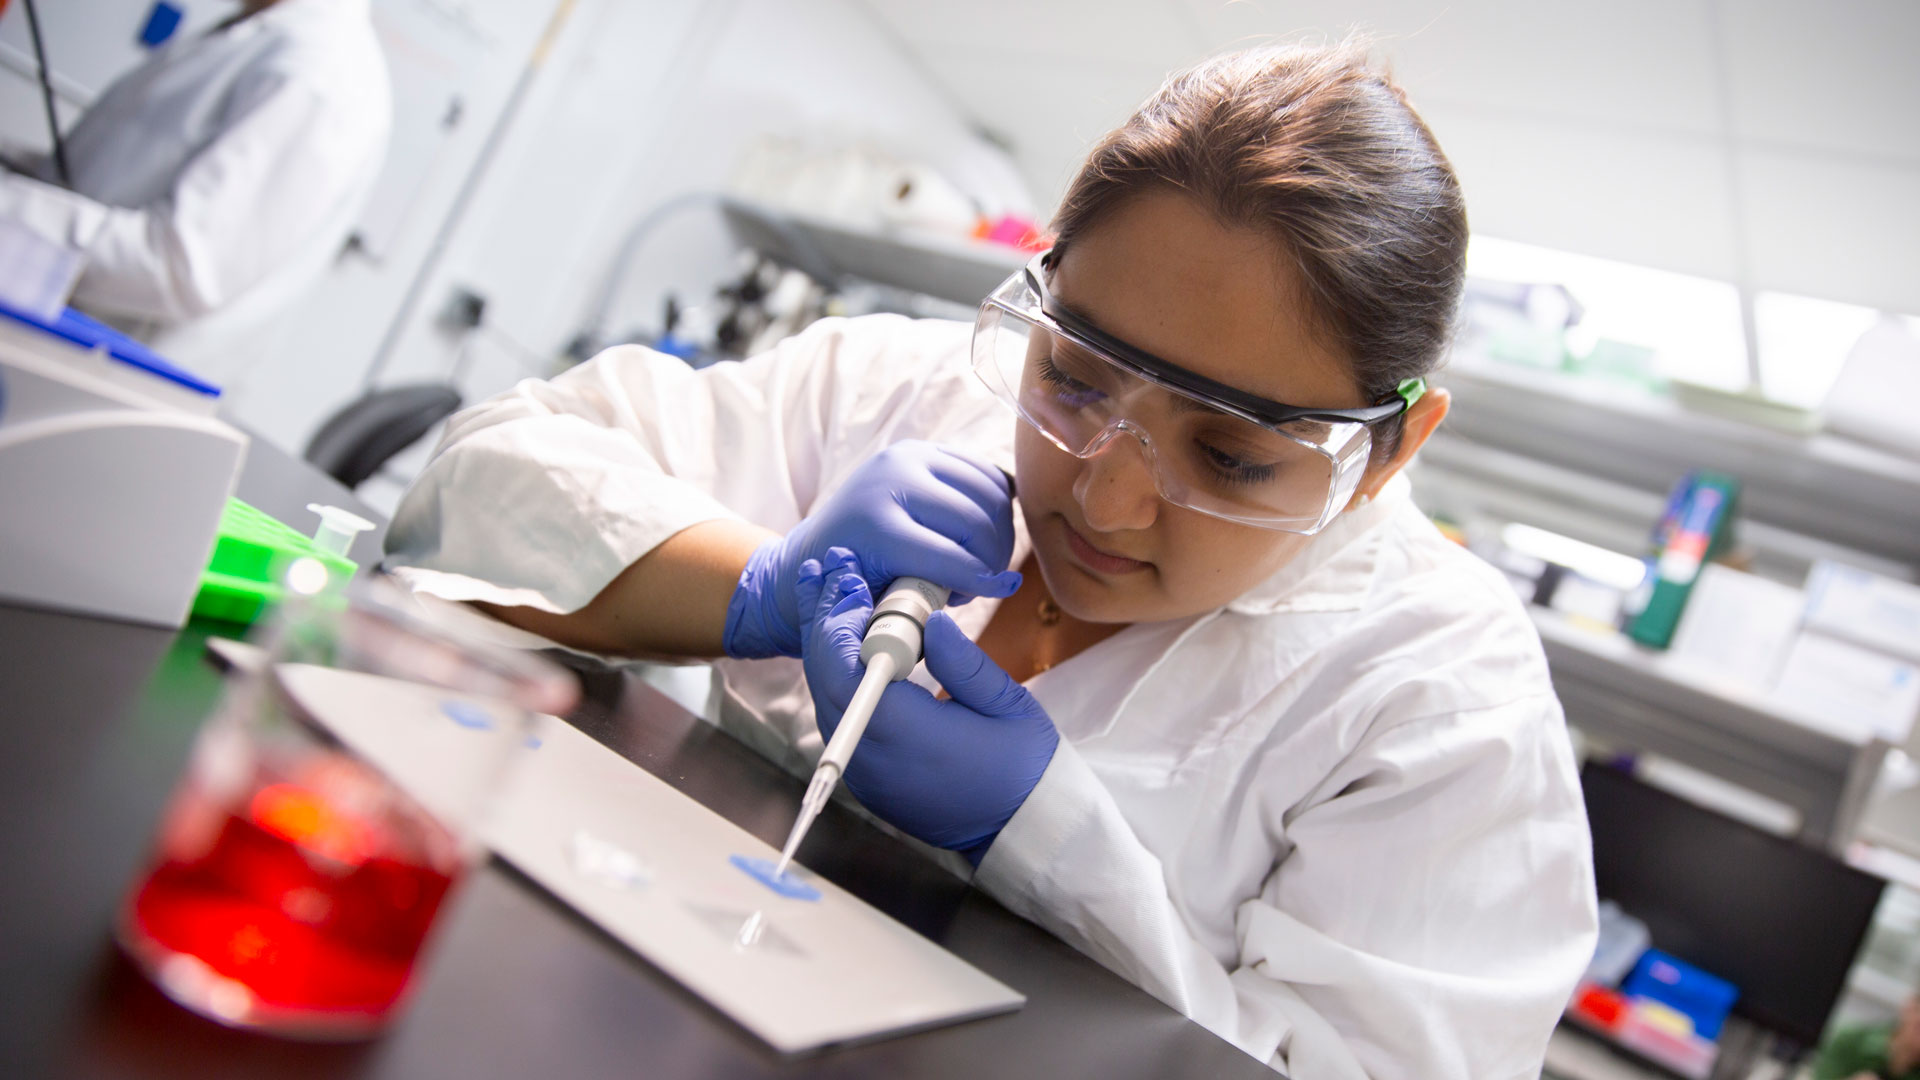 FURI student researcher Emily Mahadevan works with a pipette in the lab.